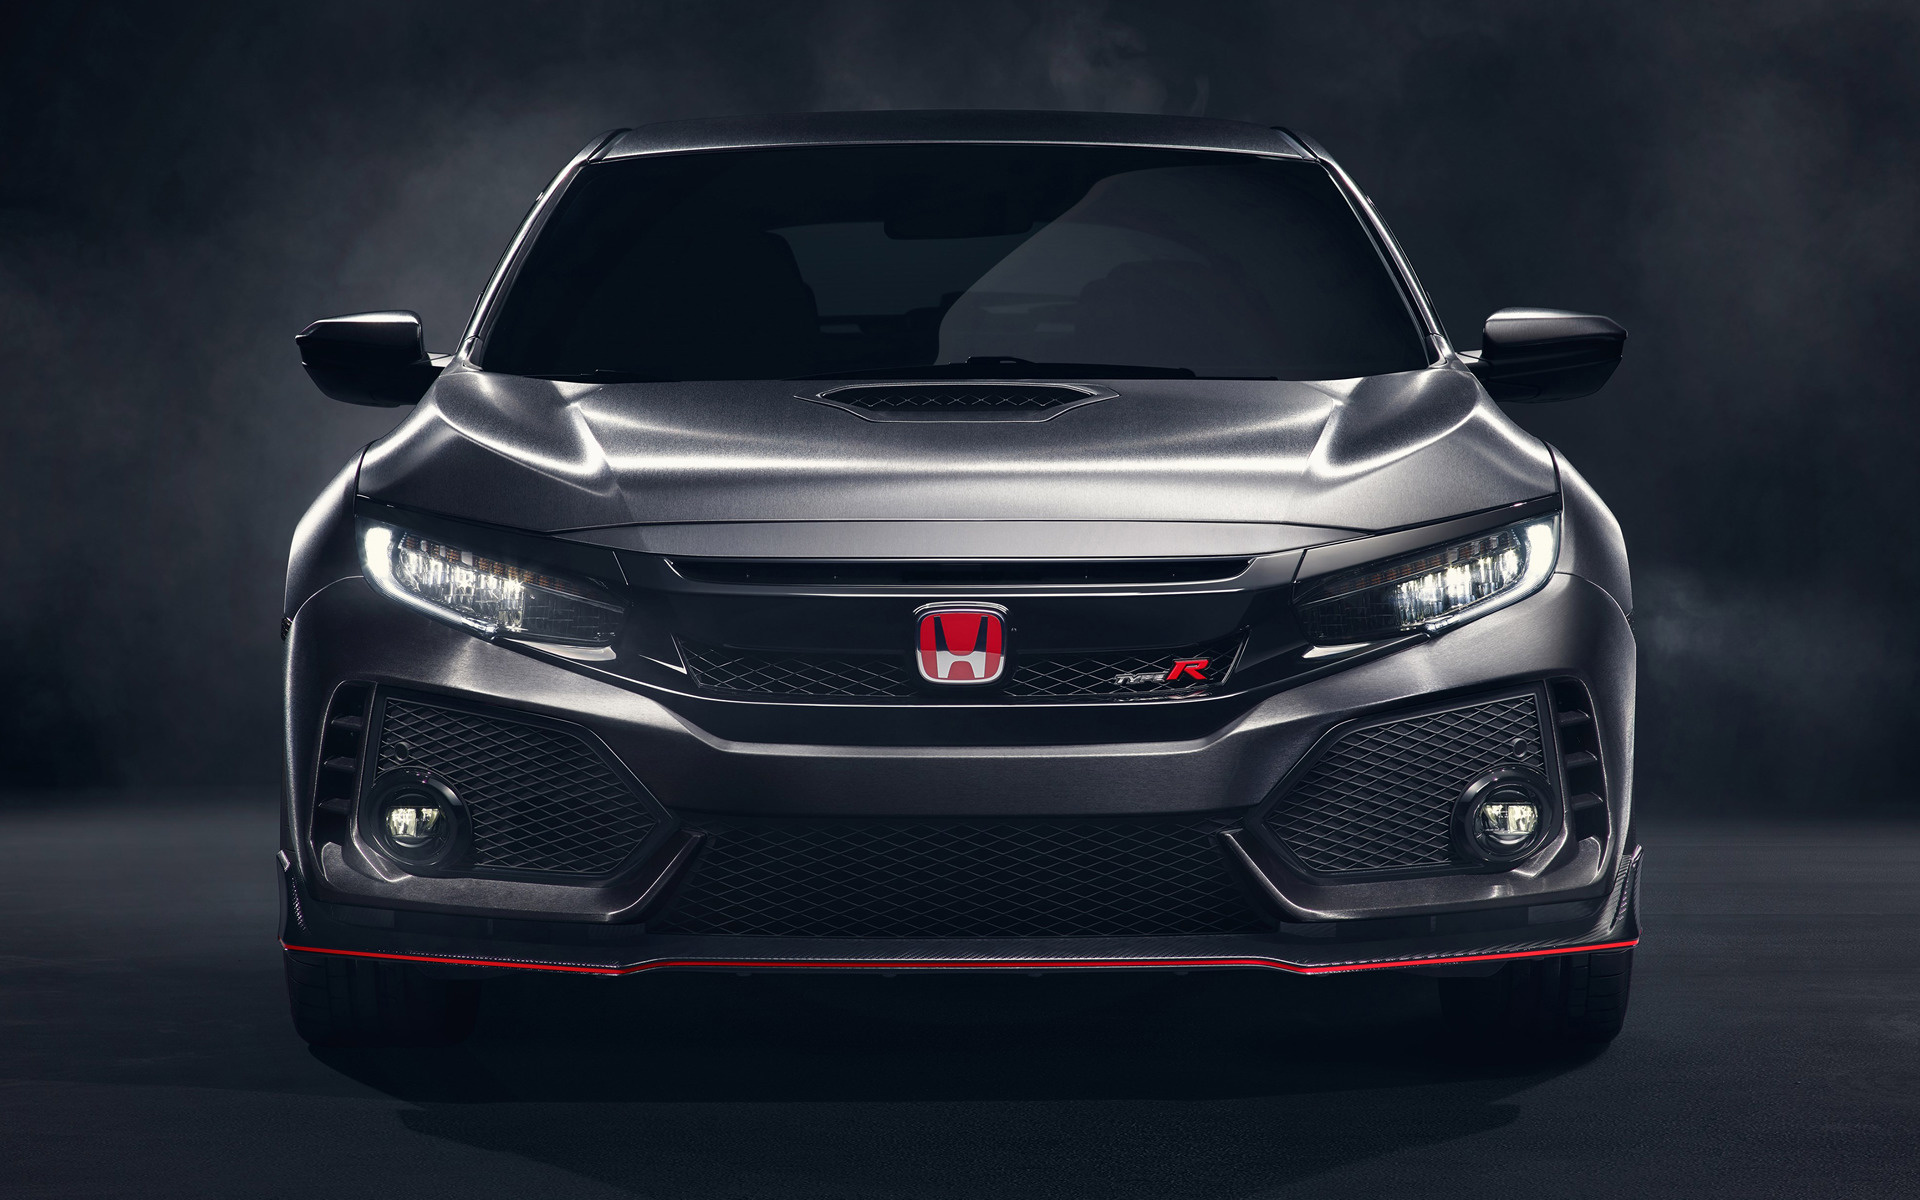 Honda Civic Type R Prototype (2016) Wallpapers and HD Images - Car Pixel